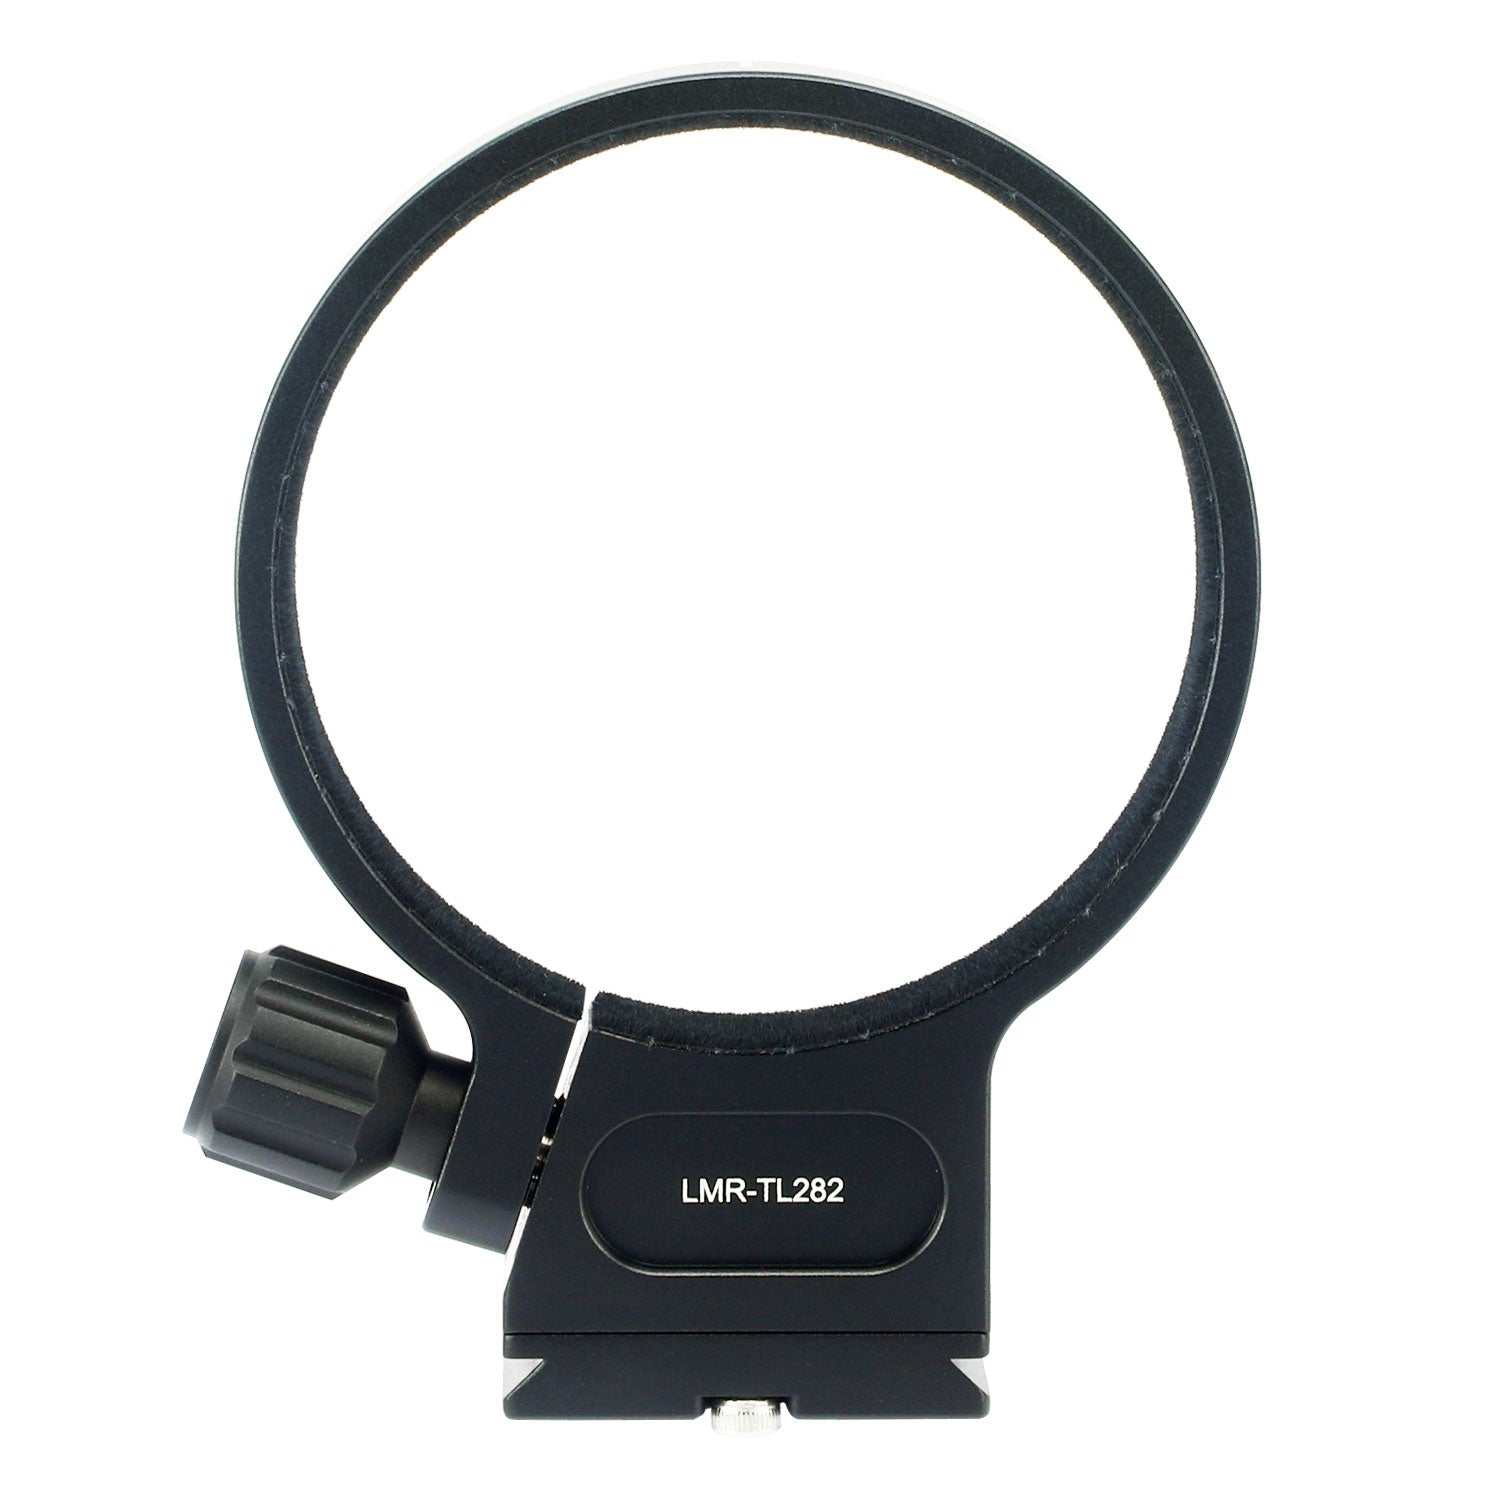 Haoge LMR-TL282 Tripod Lens Mount Ring Collar Replacement Foot Tripod Mount Ring Stand Base for Tamron 28-200mm F/2.8-5.6 Di III RXD A071 Lens built-in Arca Type Quick Release Plate Replace